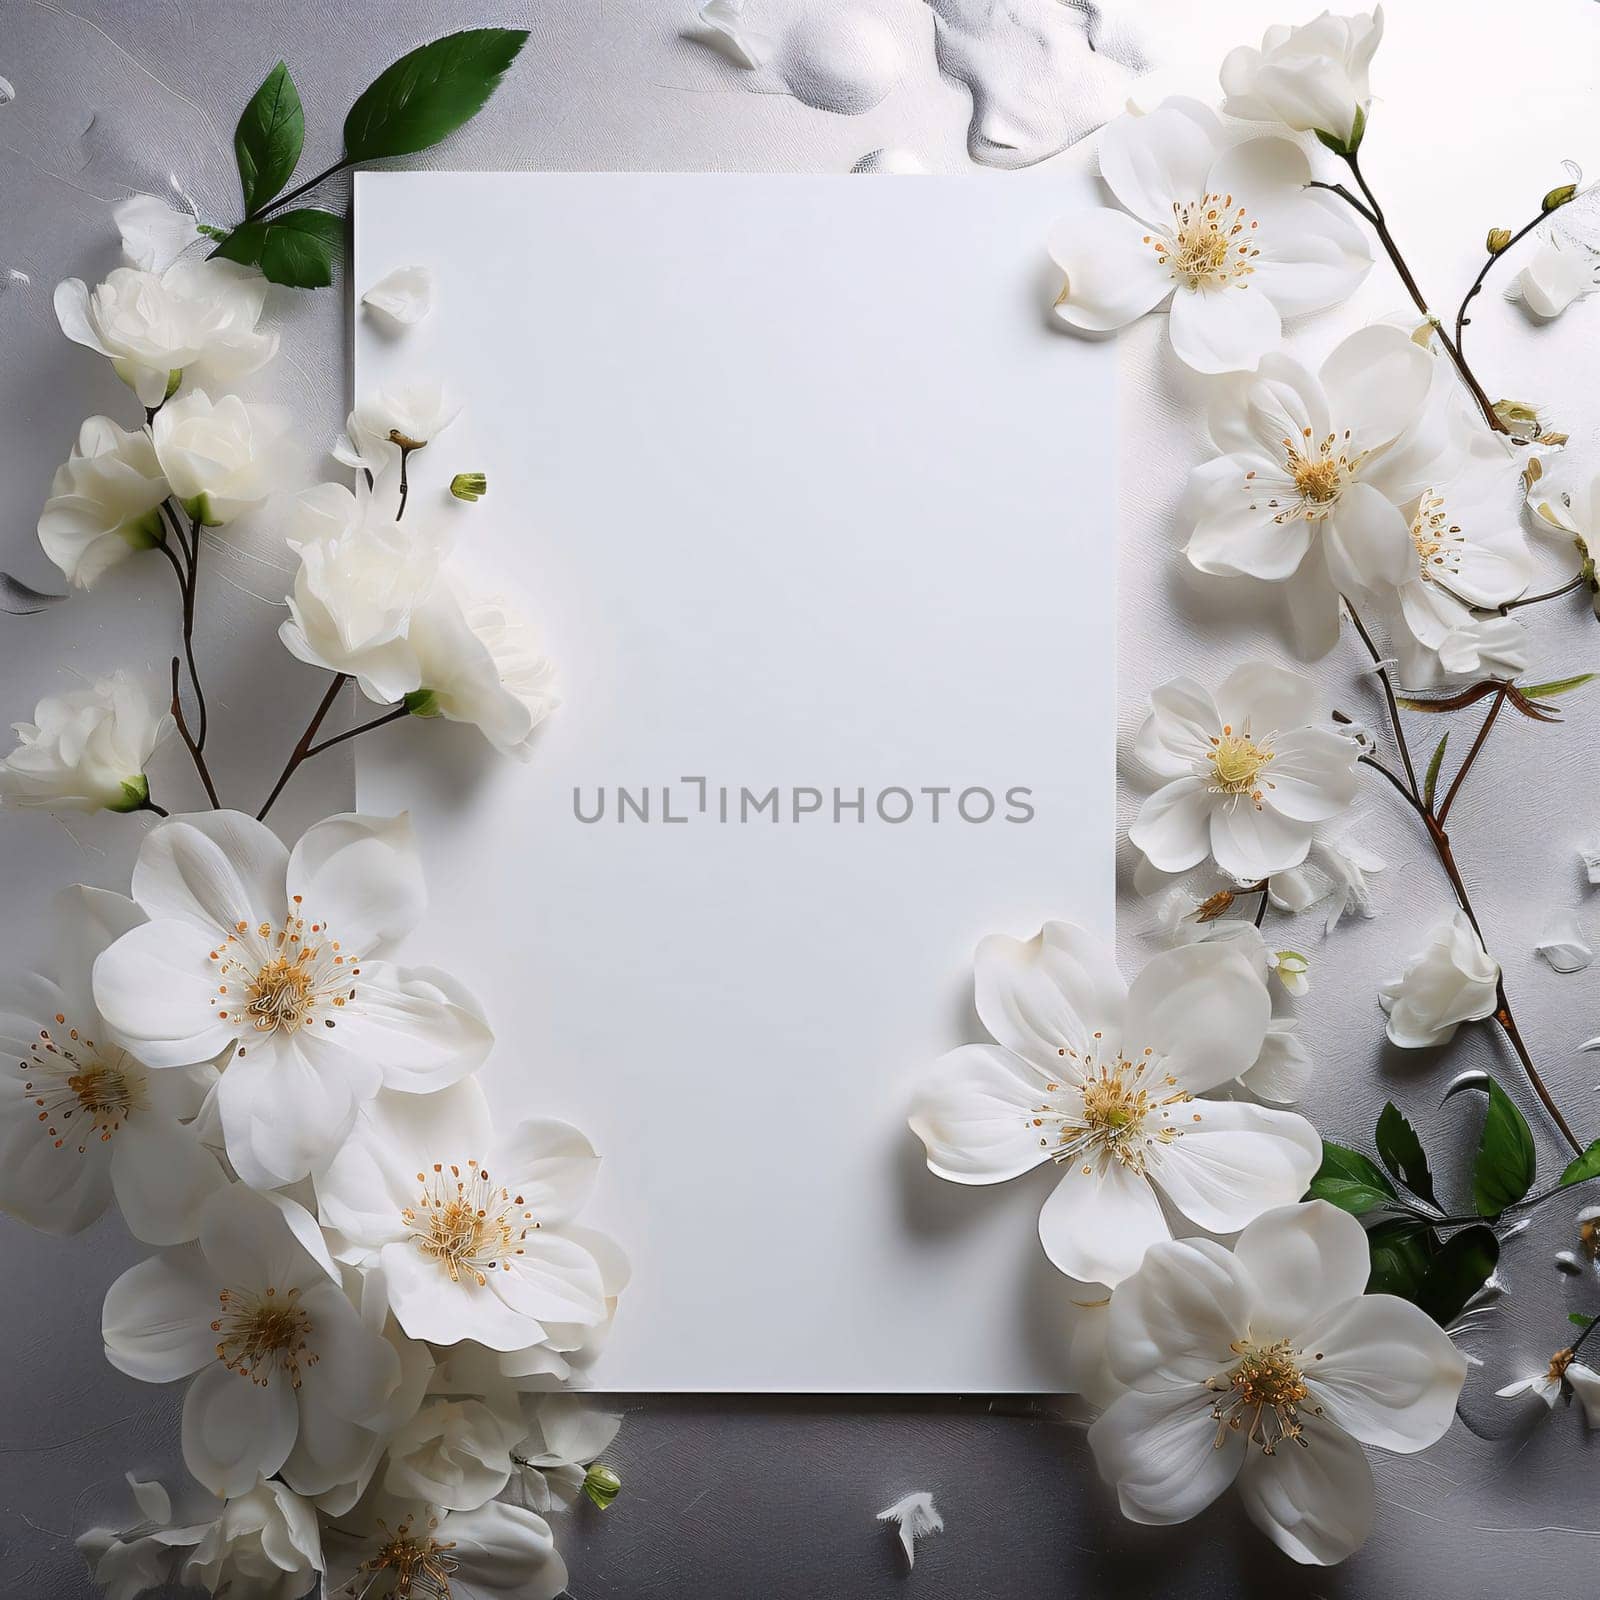 White blank card with space for your own content. Decorations made of white flowers. Valentine's Day as a day symbol of affection and love. A time of falling in love and love.